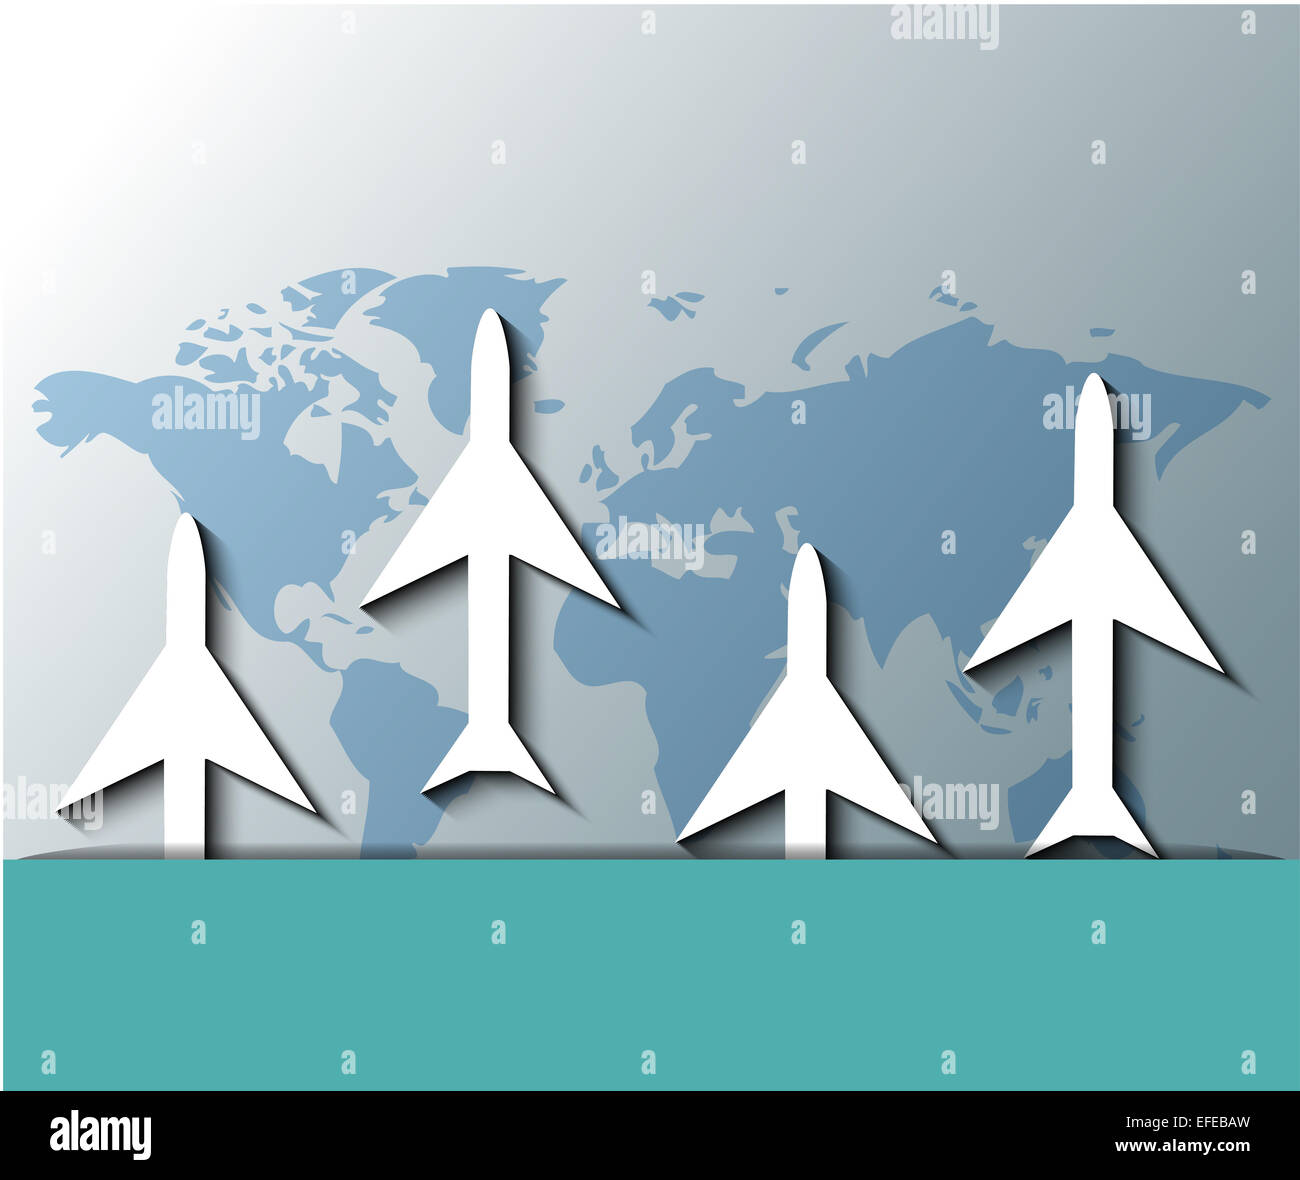 Illustration of planes flying over world map Stock Photo